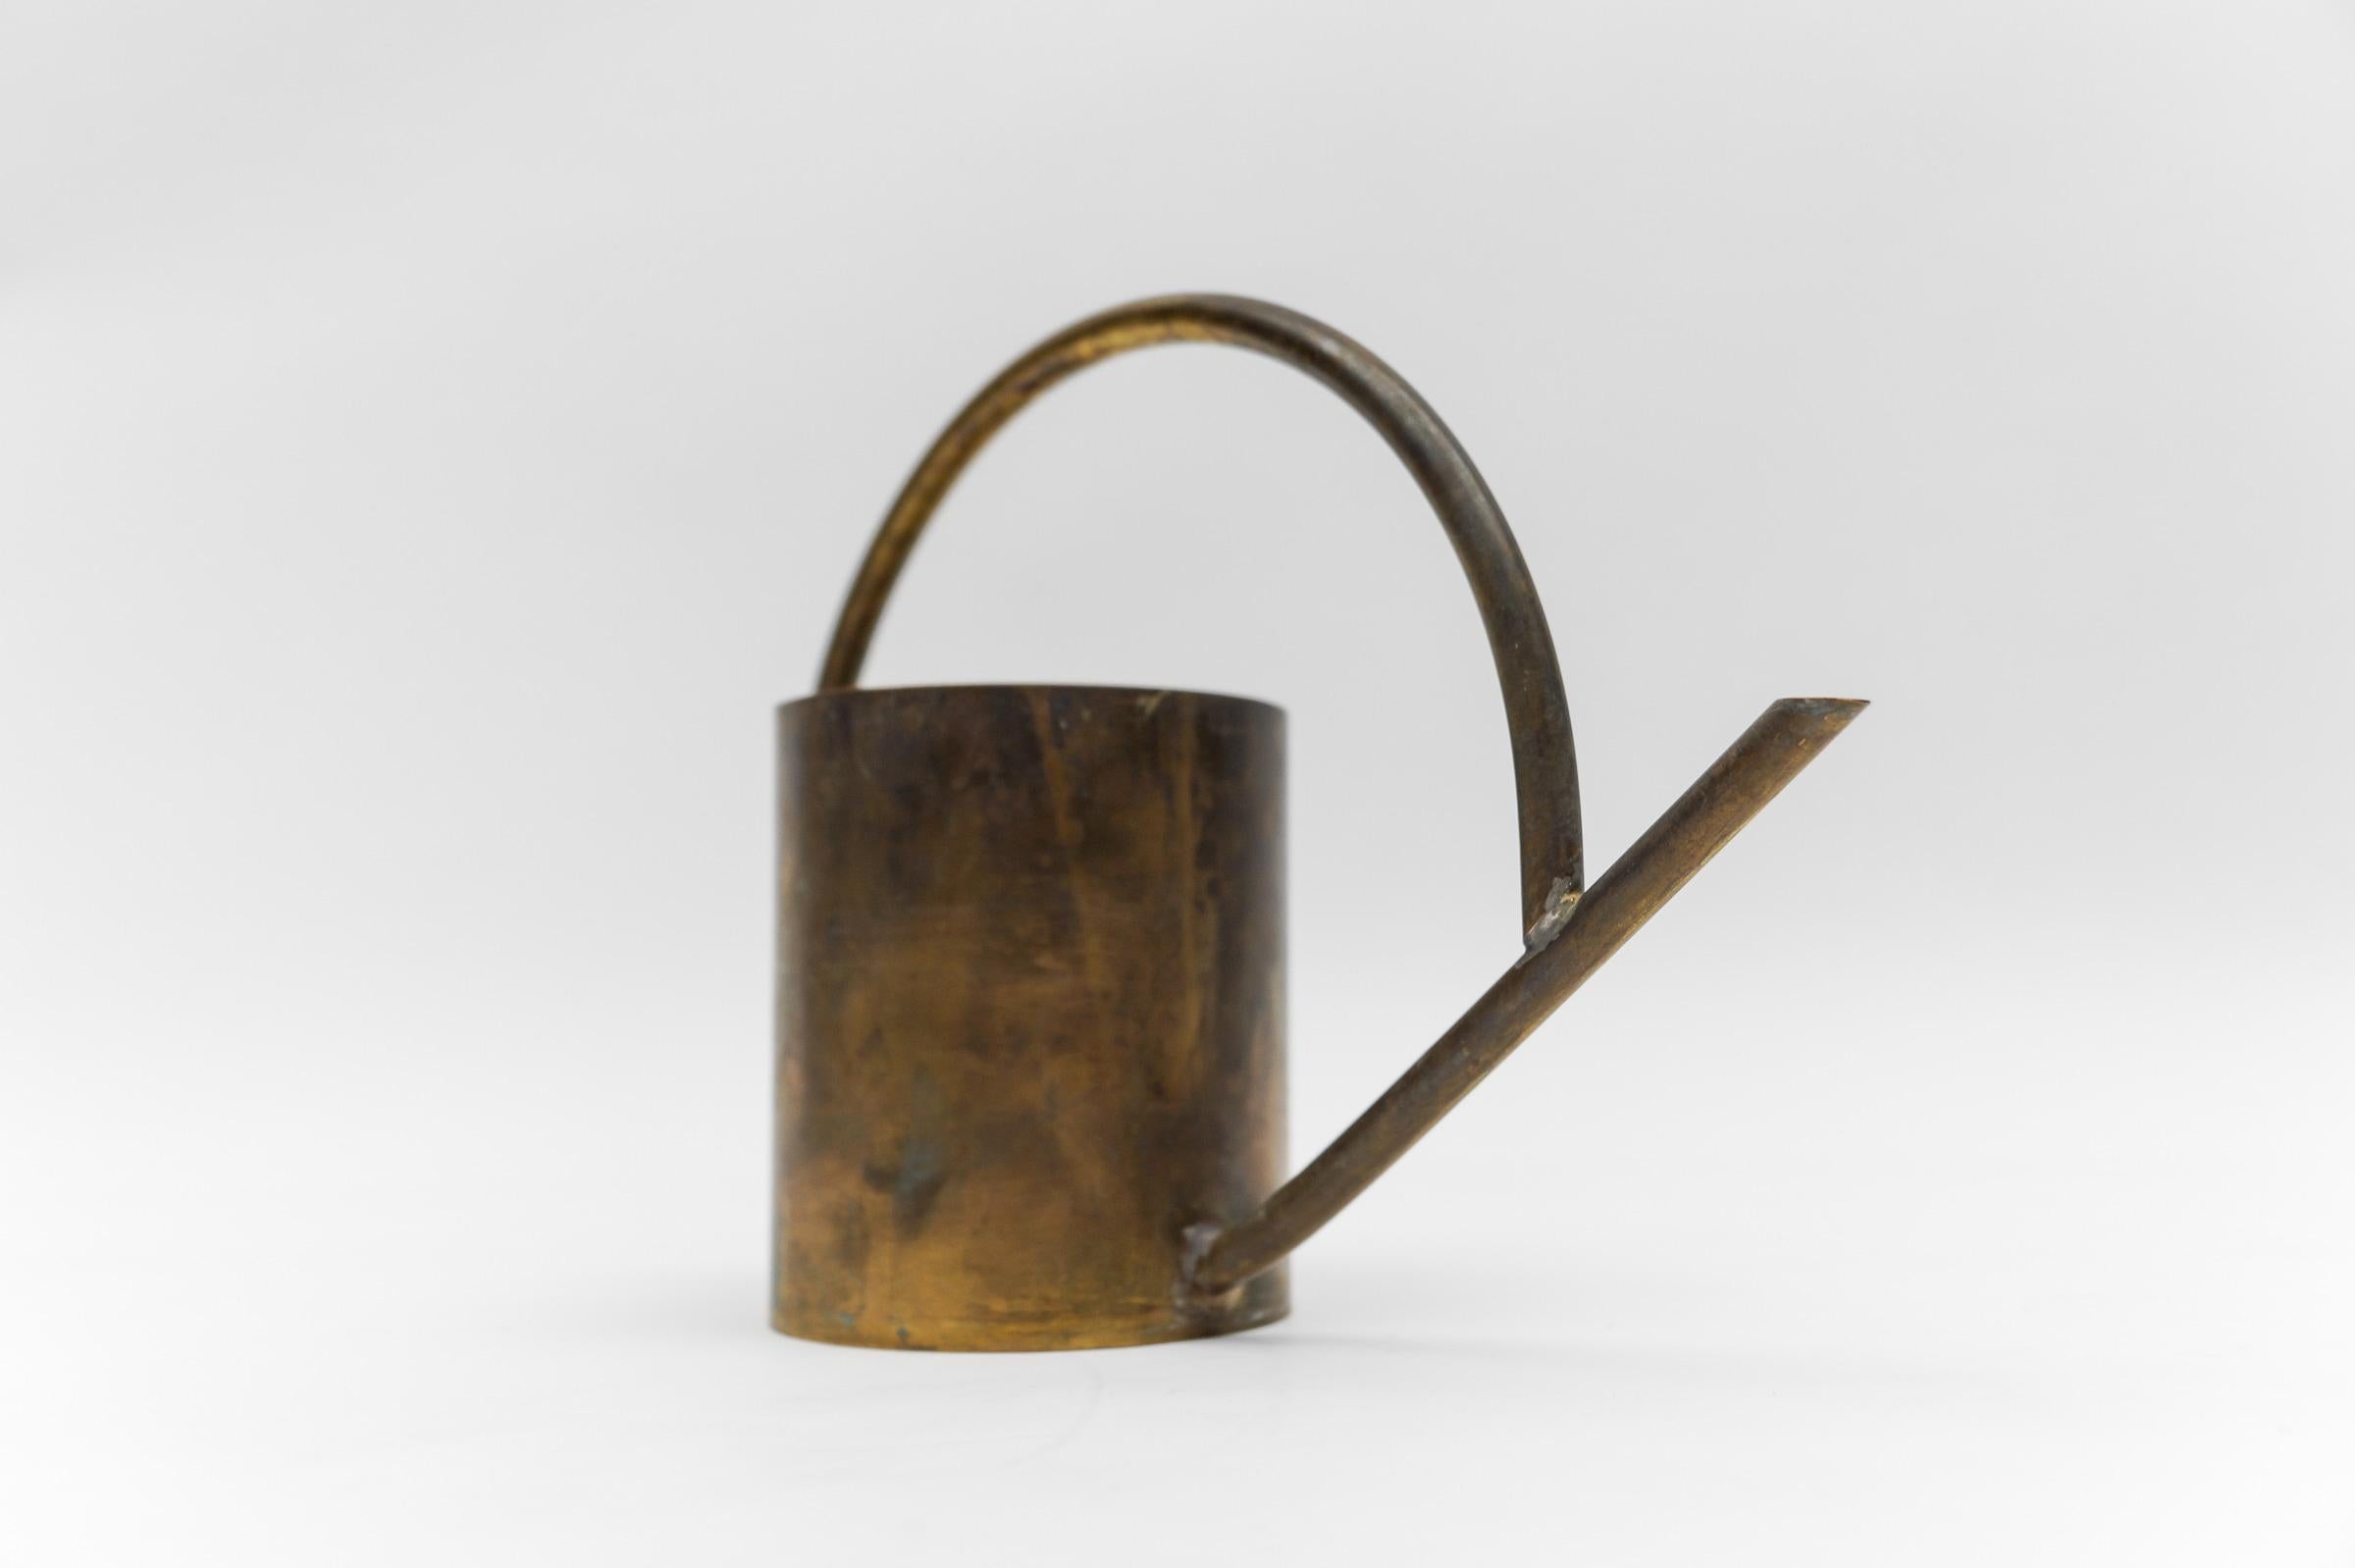 Austrian Art Deco Bauhaus  Watering Can in Massive Brass, 1930s / 1940s Germany For Sale